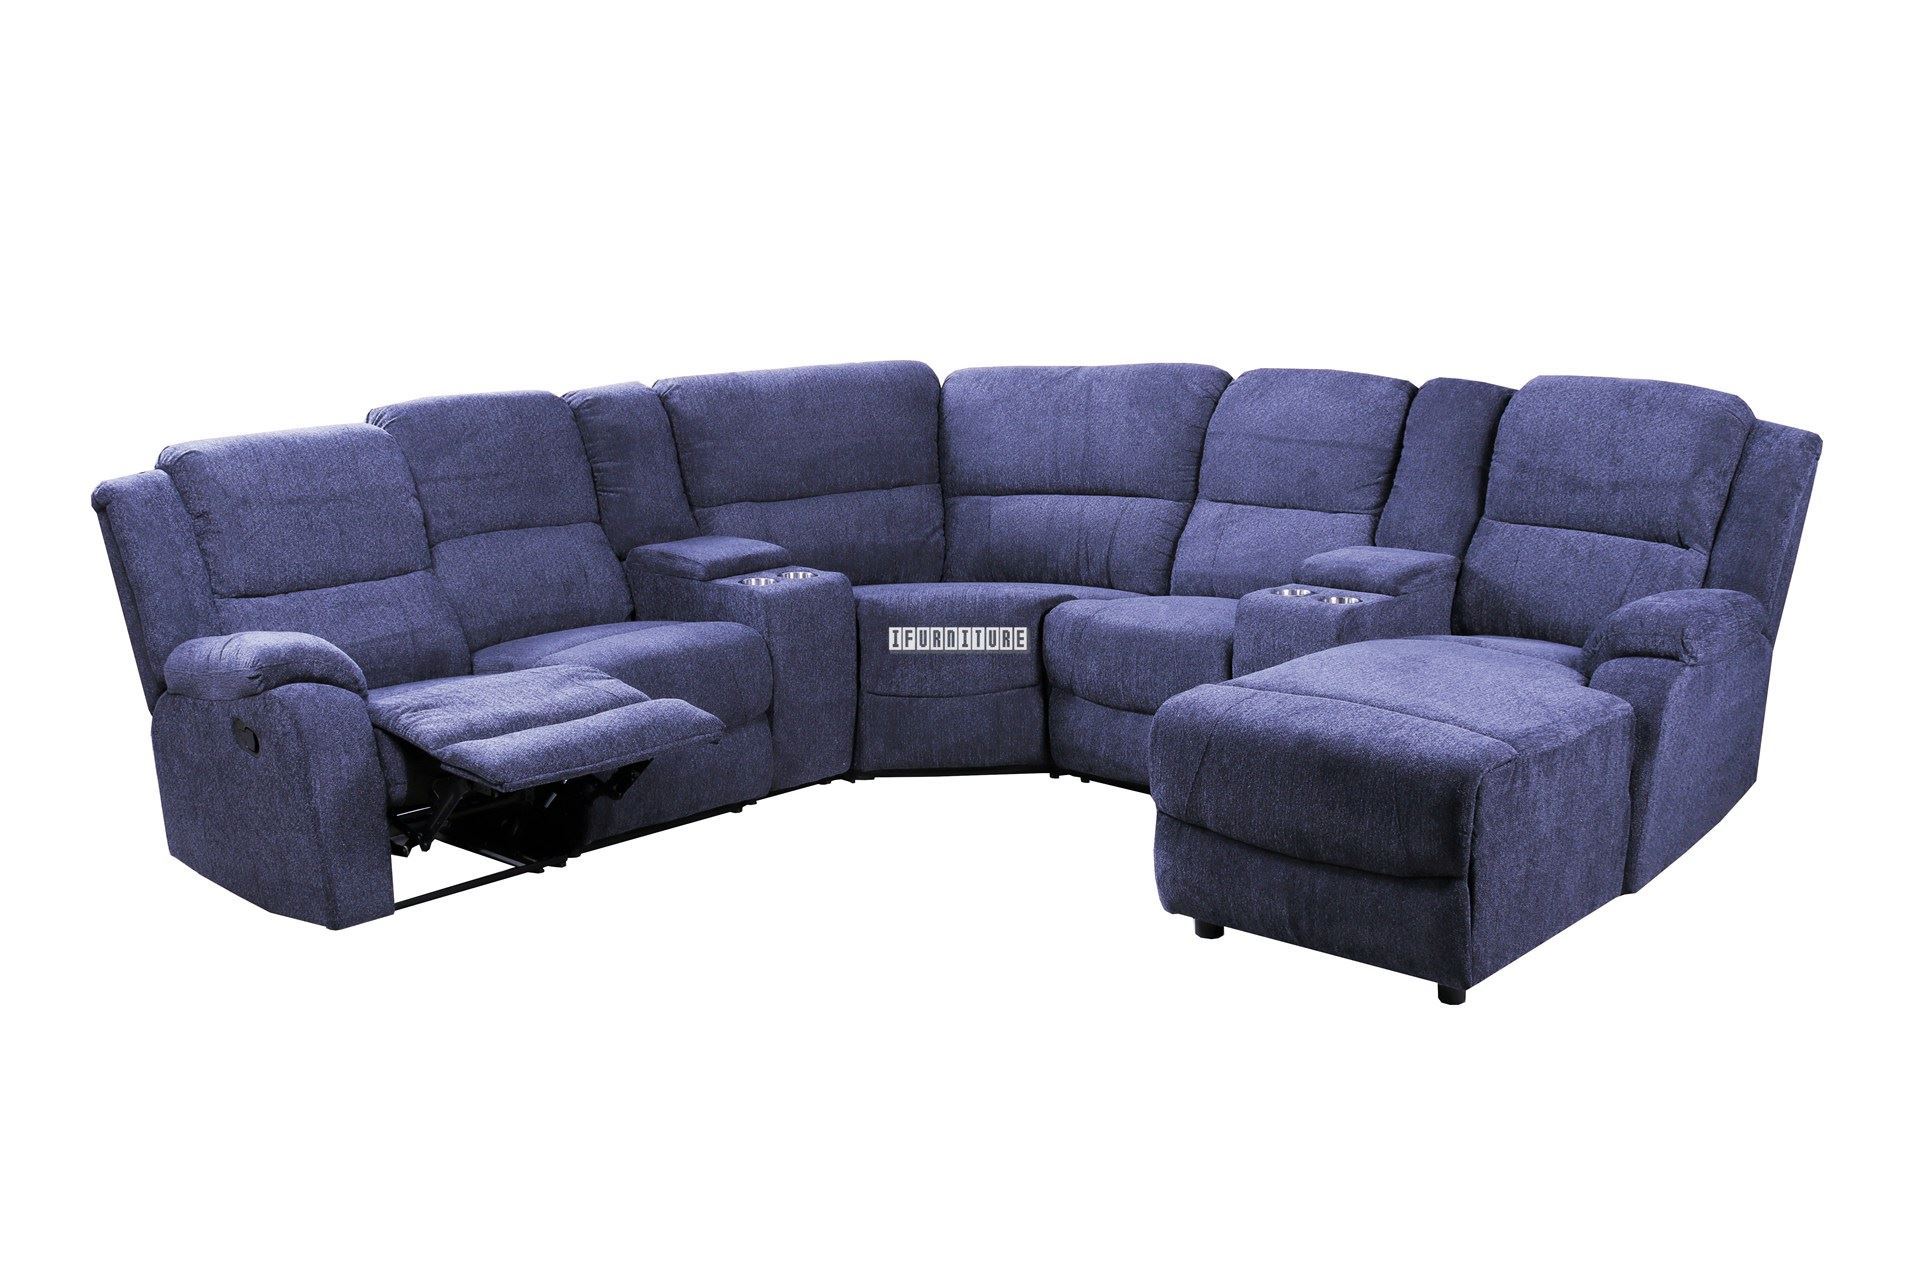 0034352 Alto Sectional Modular Reclining Sofa With Chaise Cup Holders And Storage 